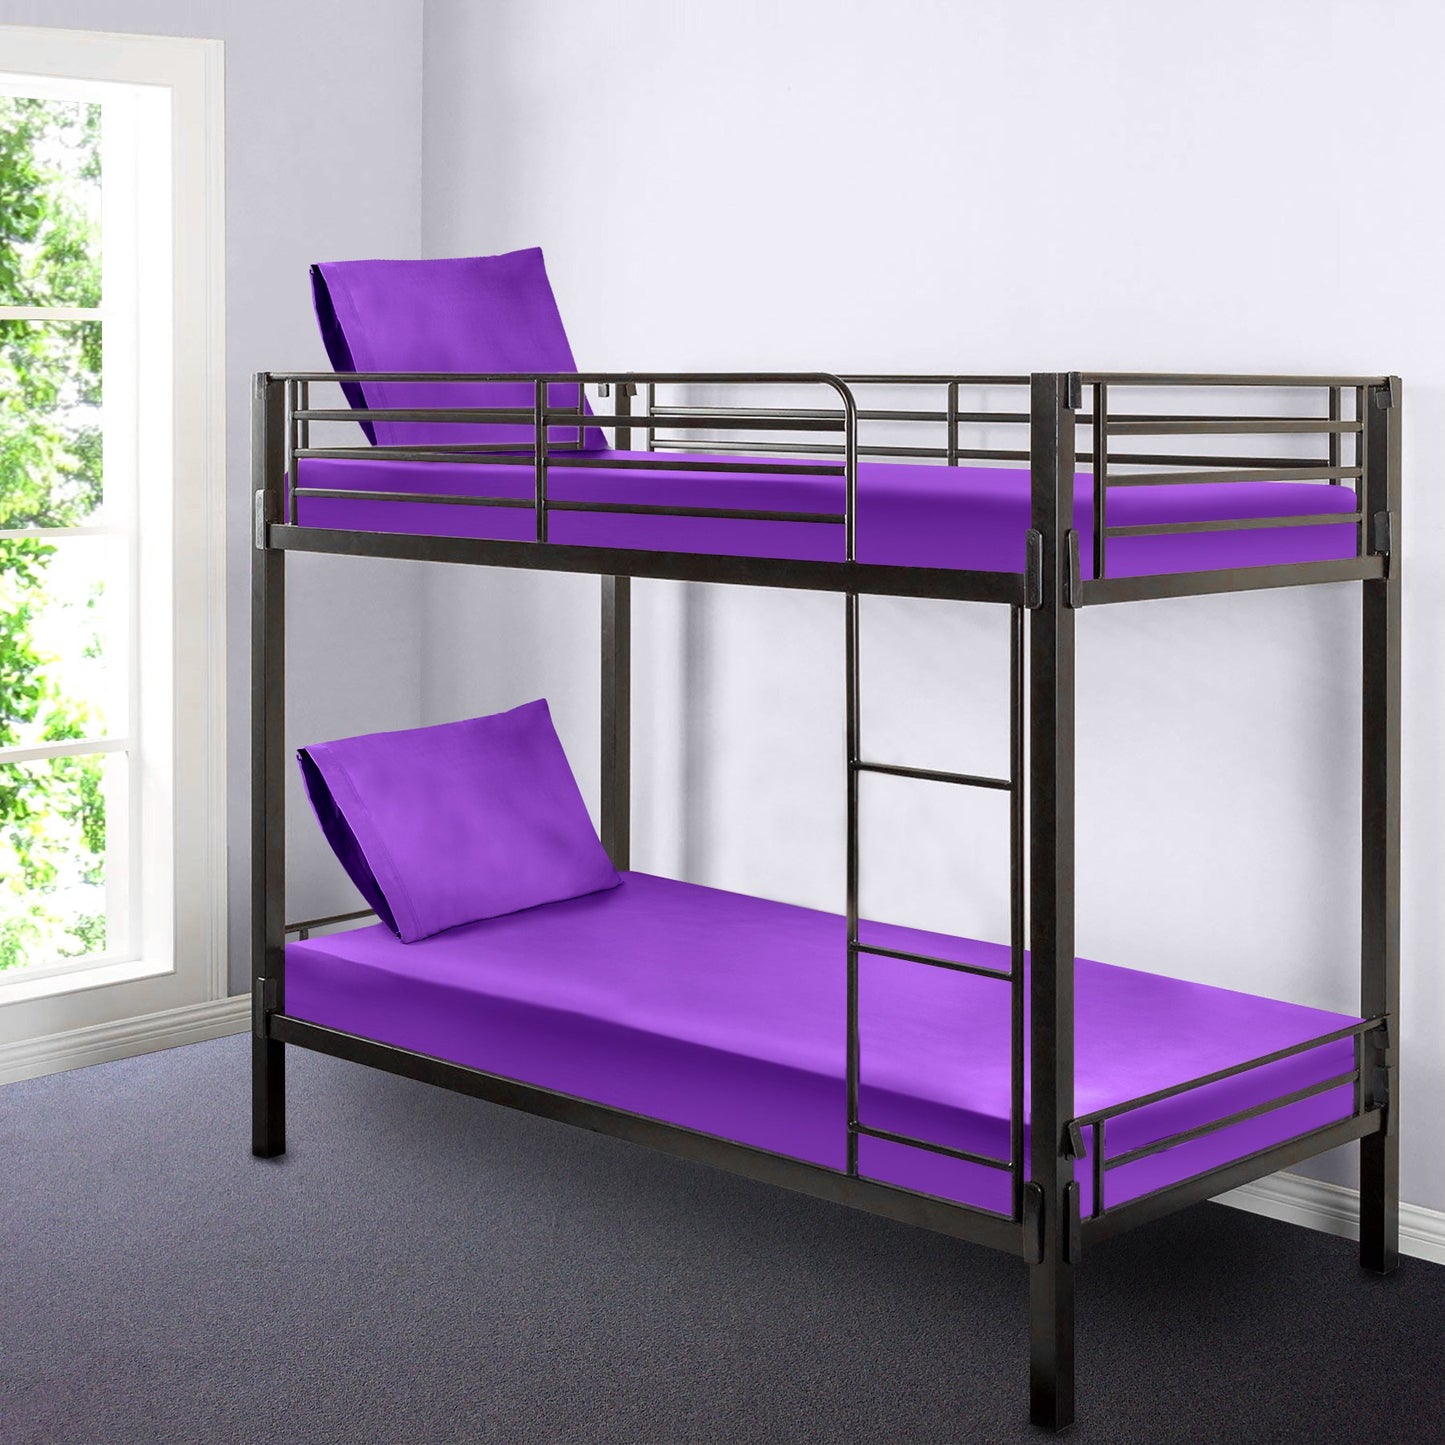 Gilbins 30" x 75" Cot Size 2-Piece Bed Sheet Set, Made of Ultra Soft Cotton, Perfect for Camp Bunk Beds/RVs/Guest Beds (Purple)